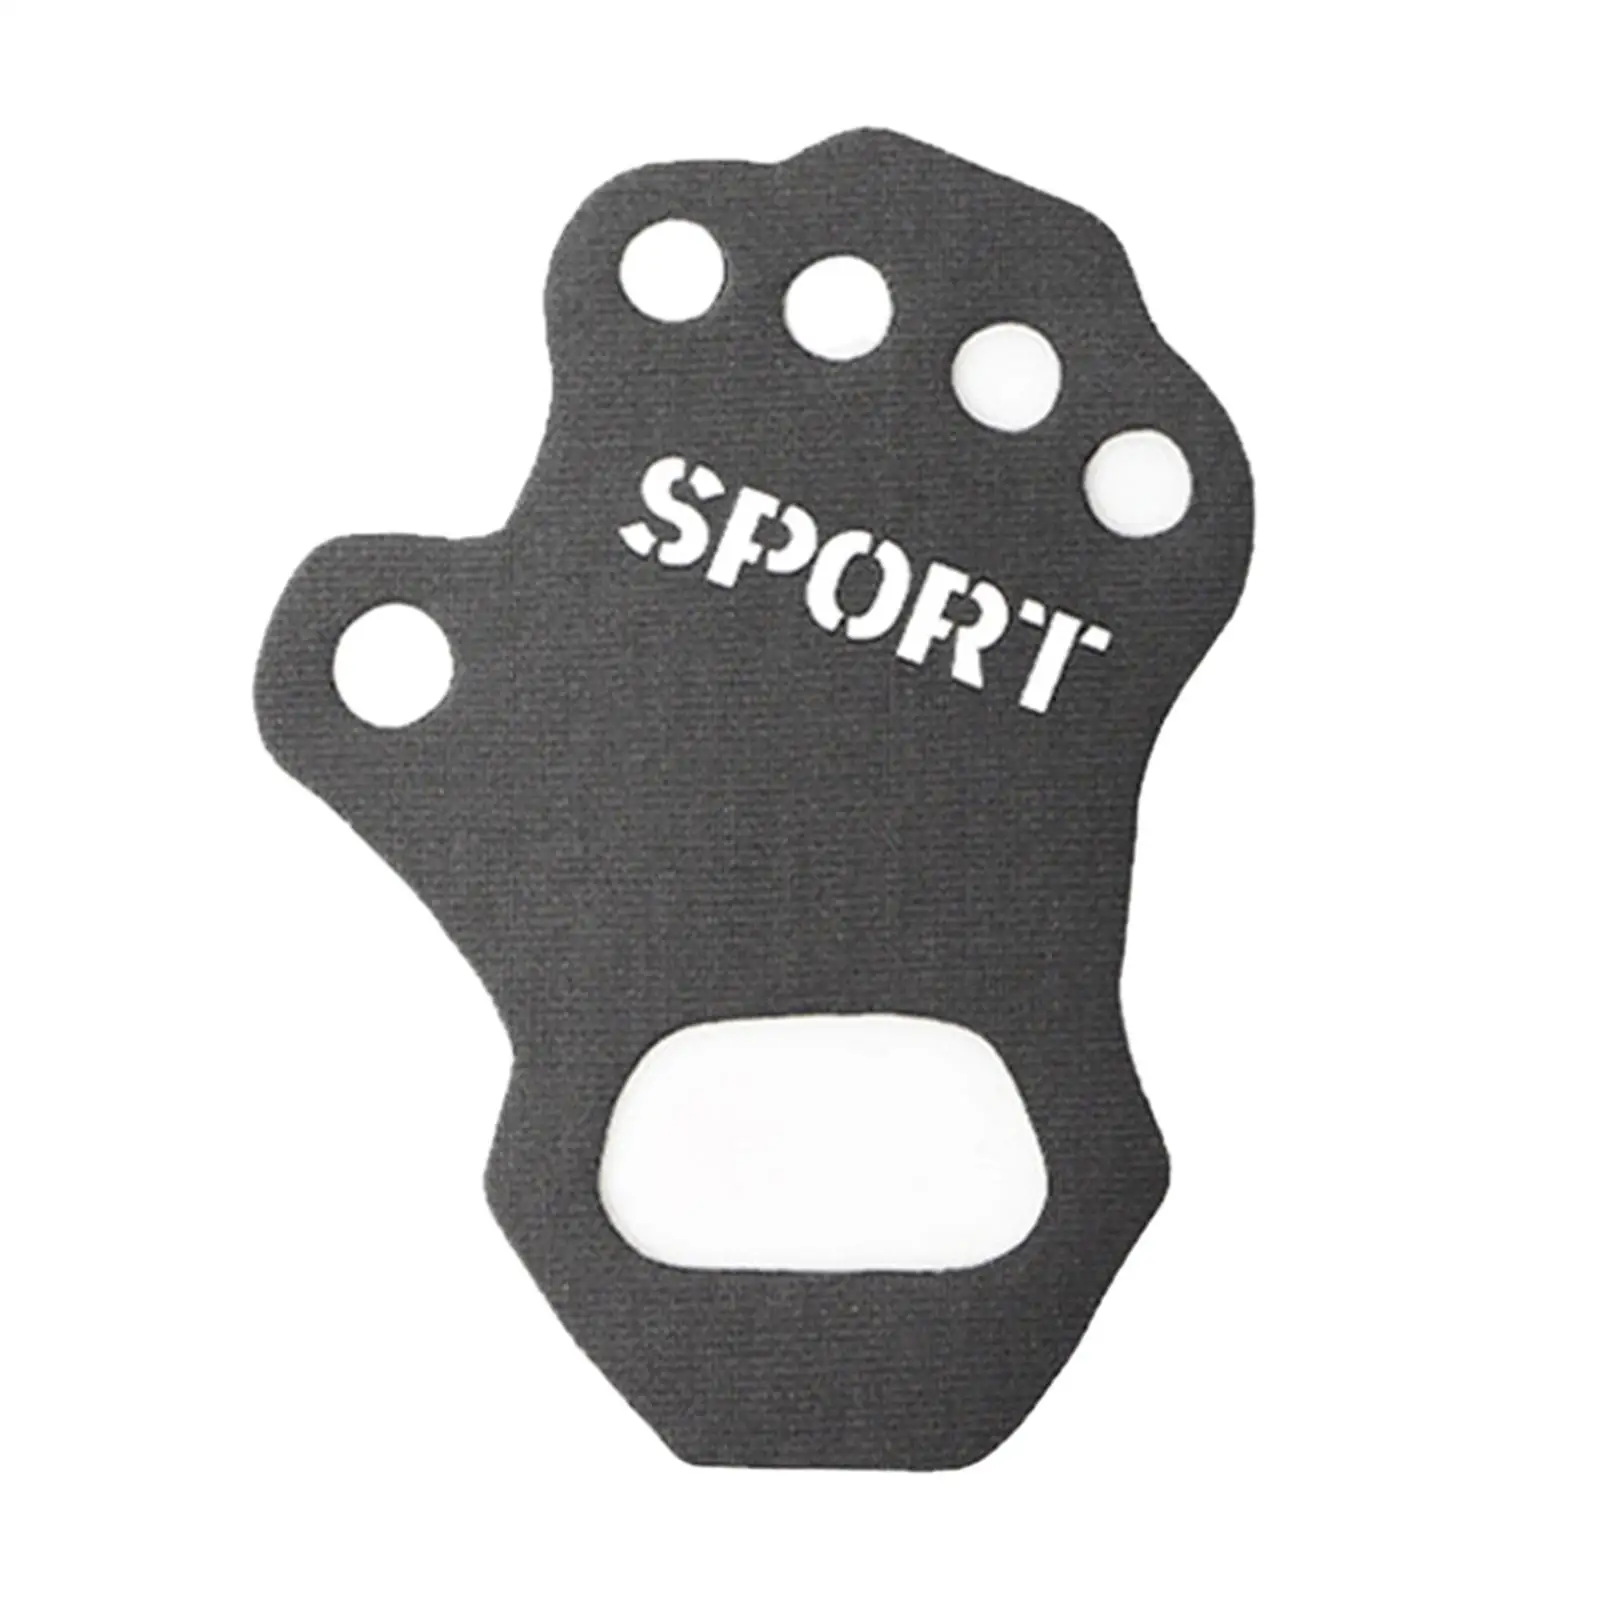 Exercise Grip Pad Partial Glove Full Palm Protection Palm Pad Glove for Powerlifting Cycling Yoga Riding Sports Weightlifting